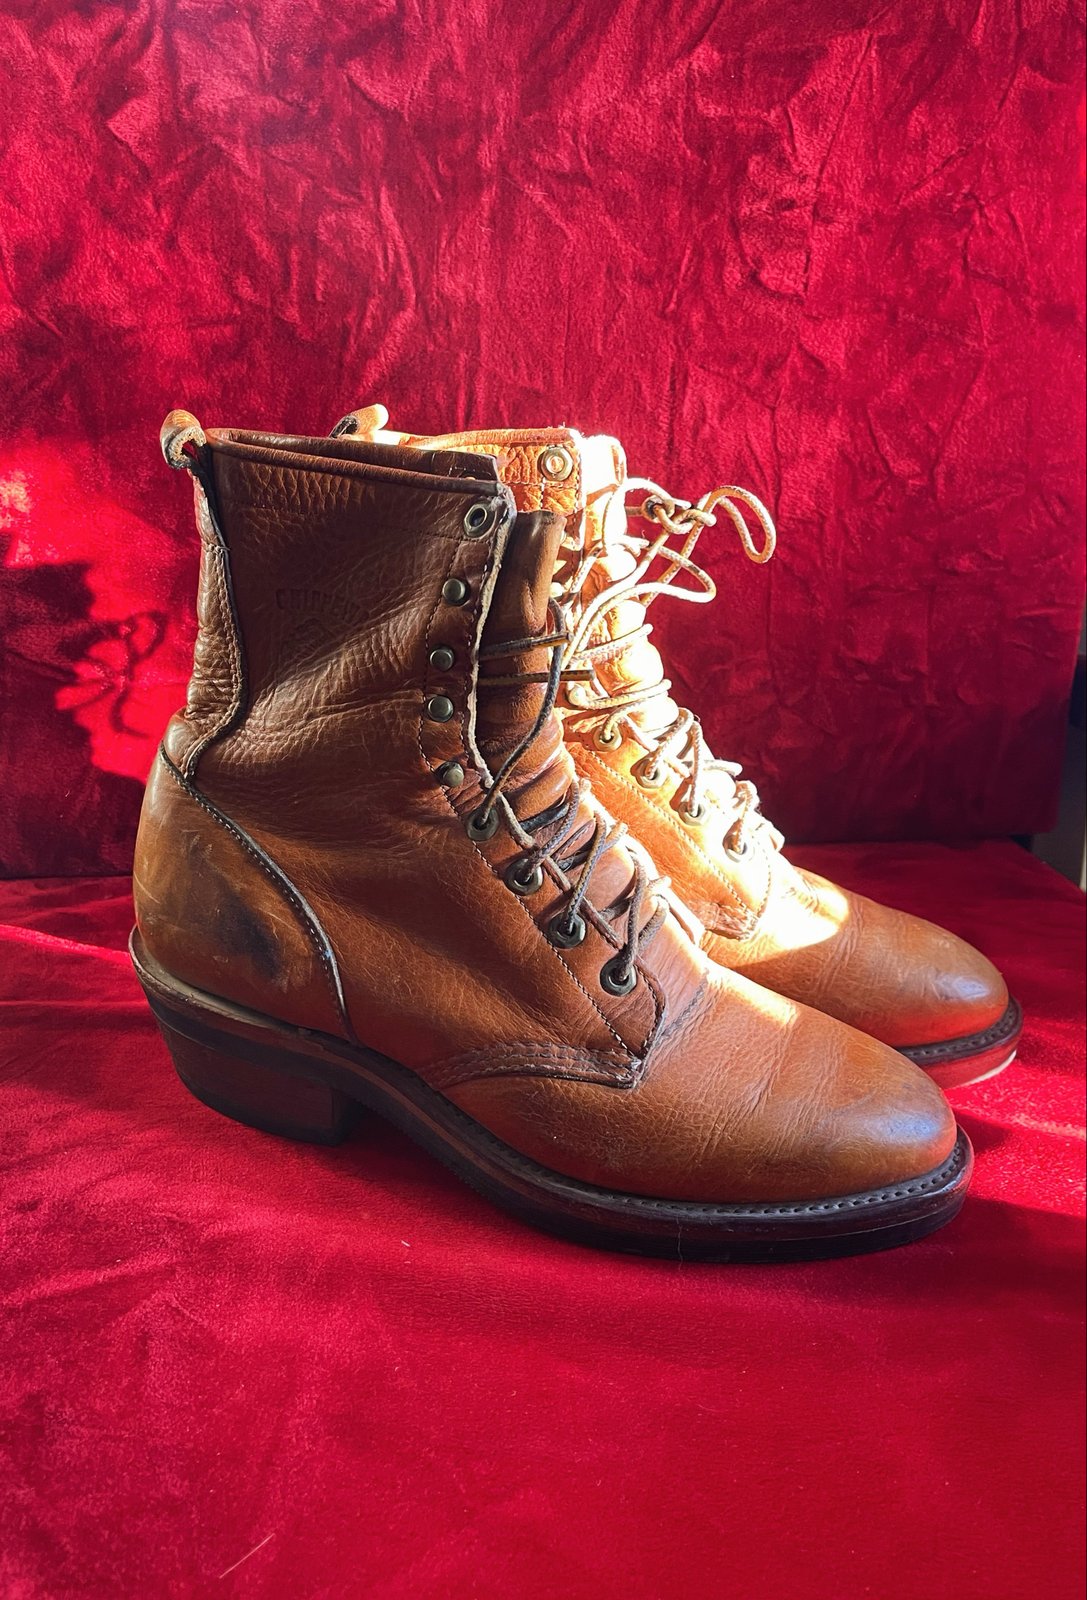 Vintage Lace Up Western Roper Boots